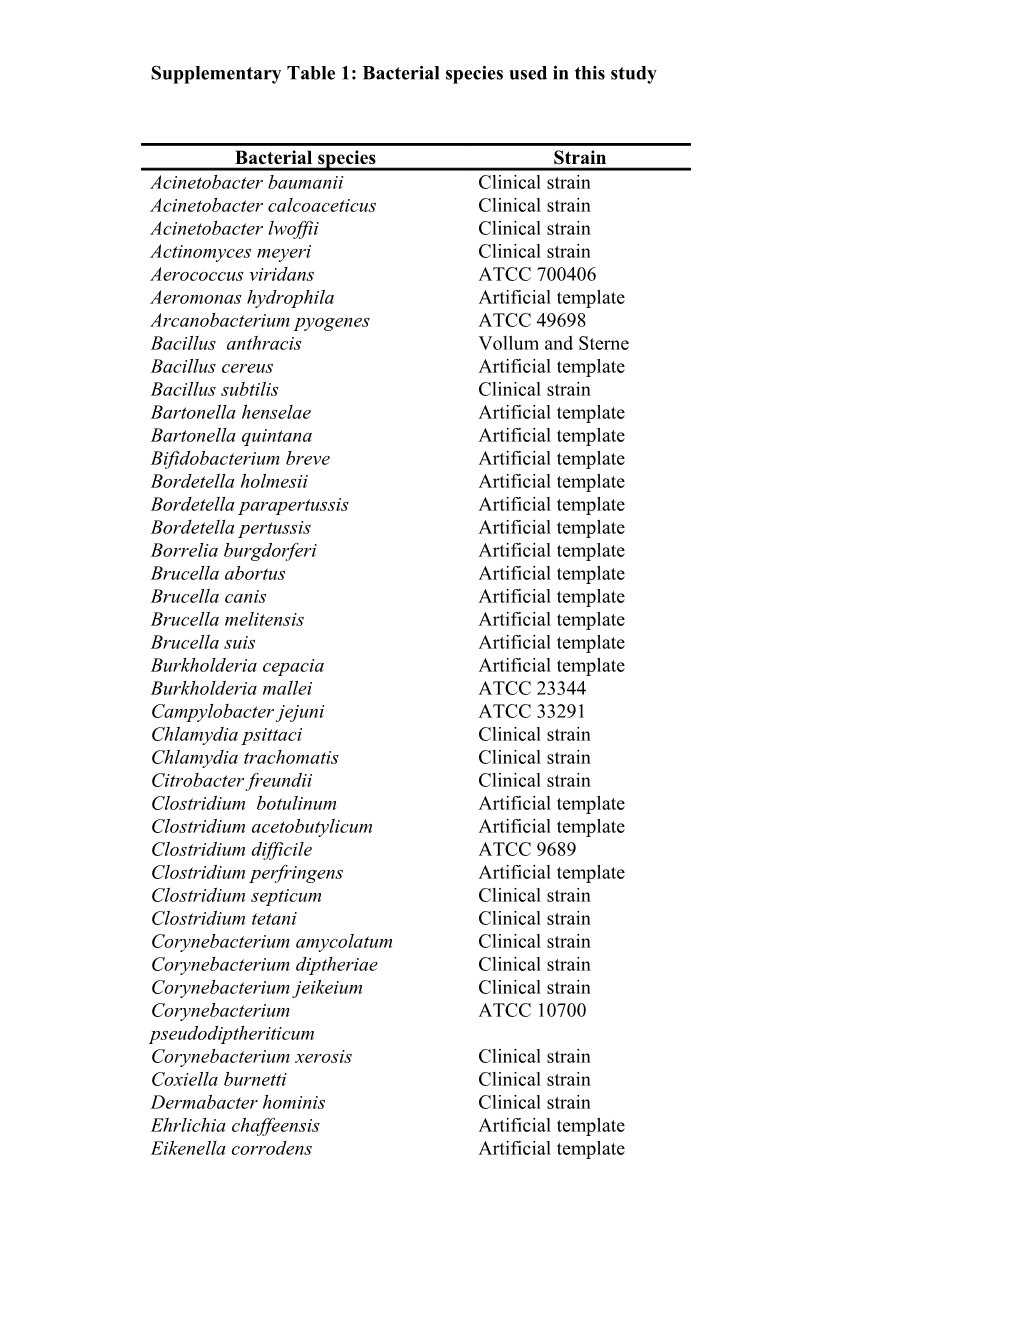 Supplementary Table 1: Bacterial Species Used in This Study (Continued)